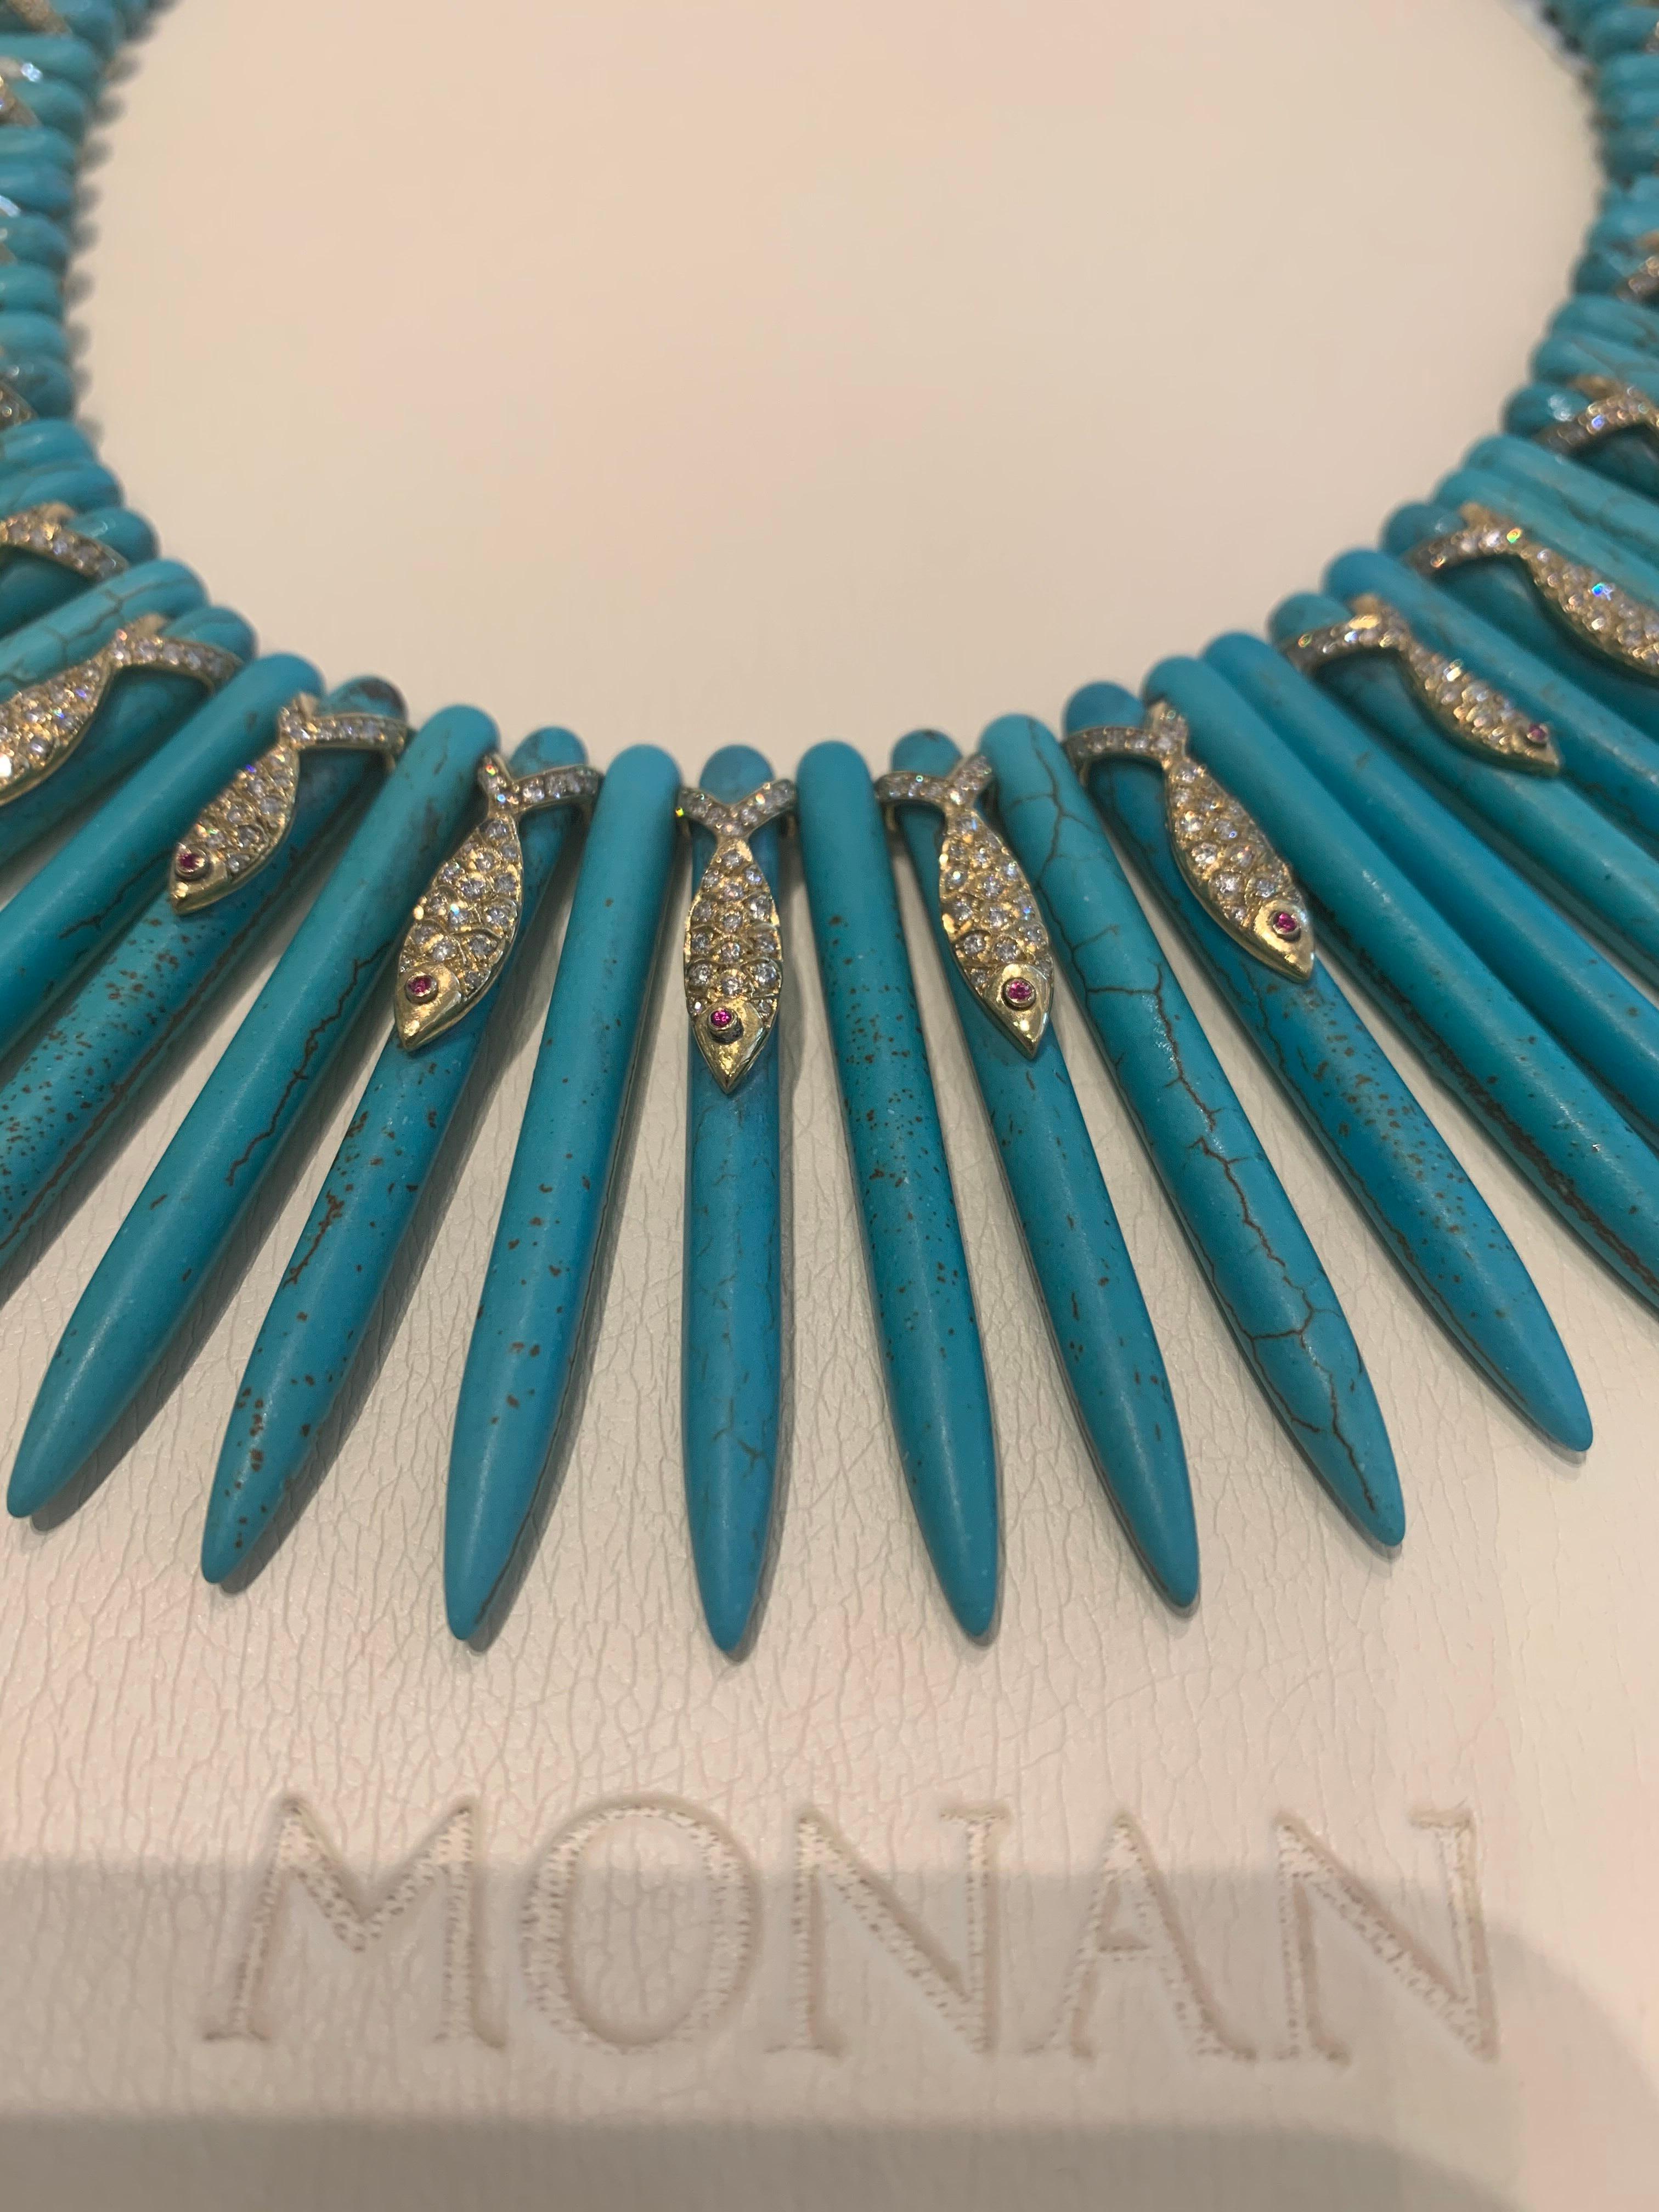 Monan one of a kind Turquoise Coast Necklace with 4,03 ct white diamond and 0,24 ct ruby set in 18 K yellow gold little fishes set in turquoise. Hand crafted to the finest detail featuring little diamond encrusted fish with ruby set eyes. The